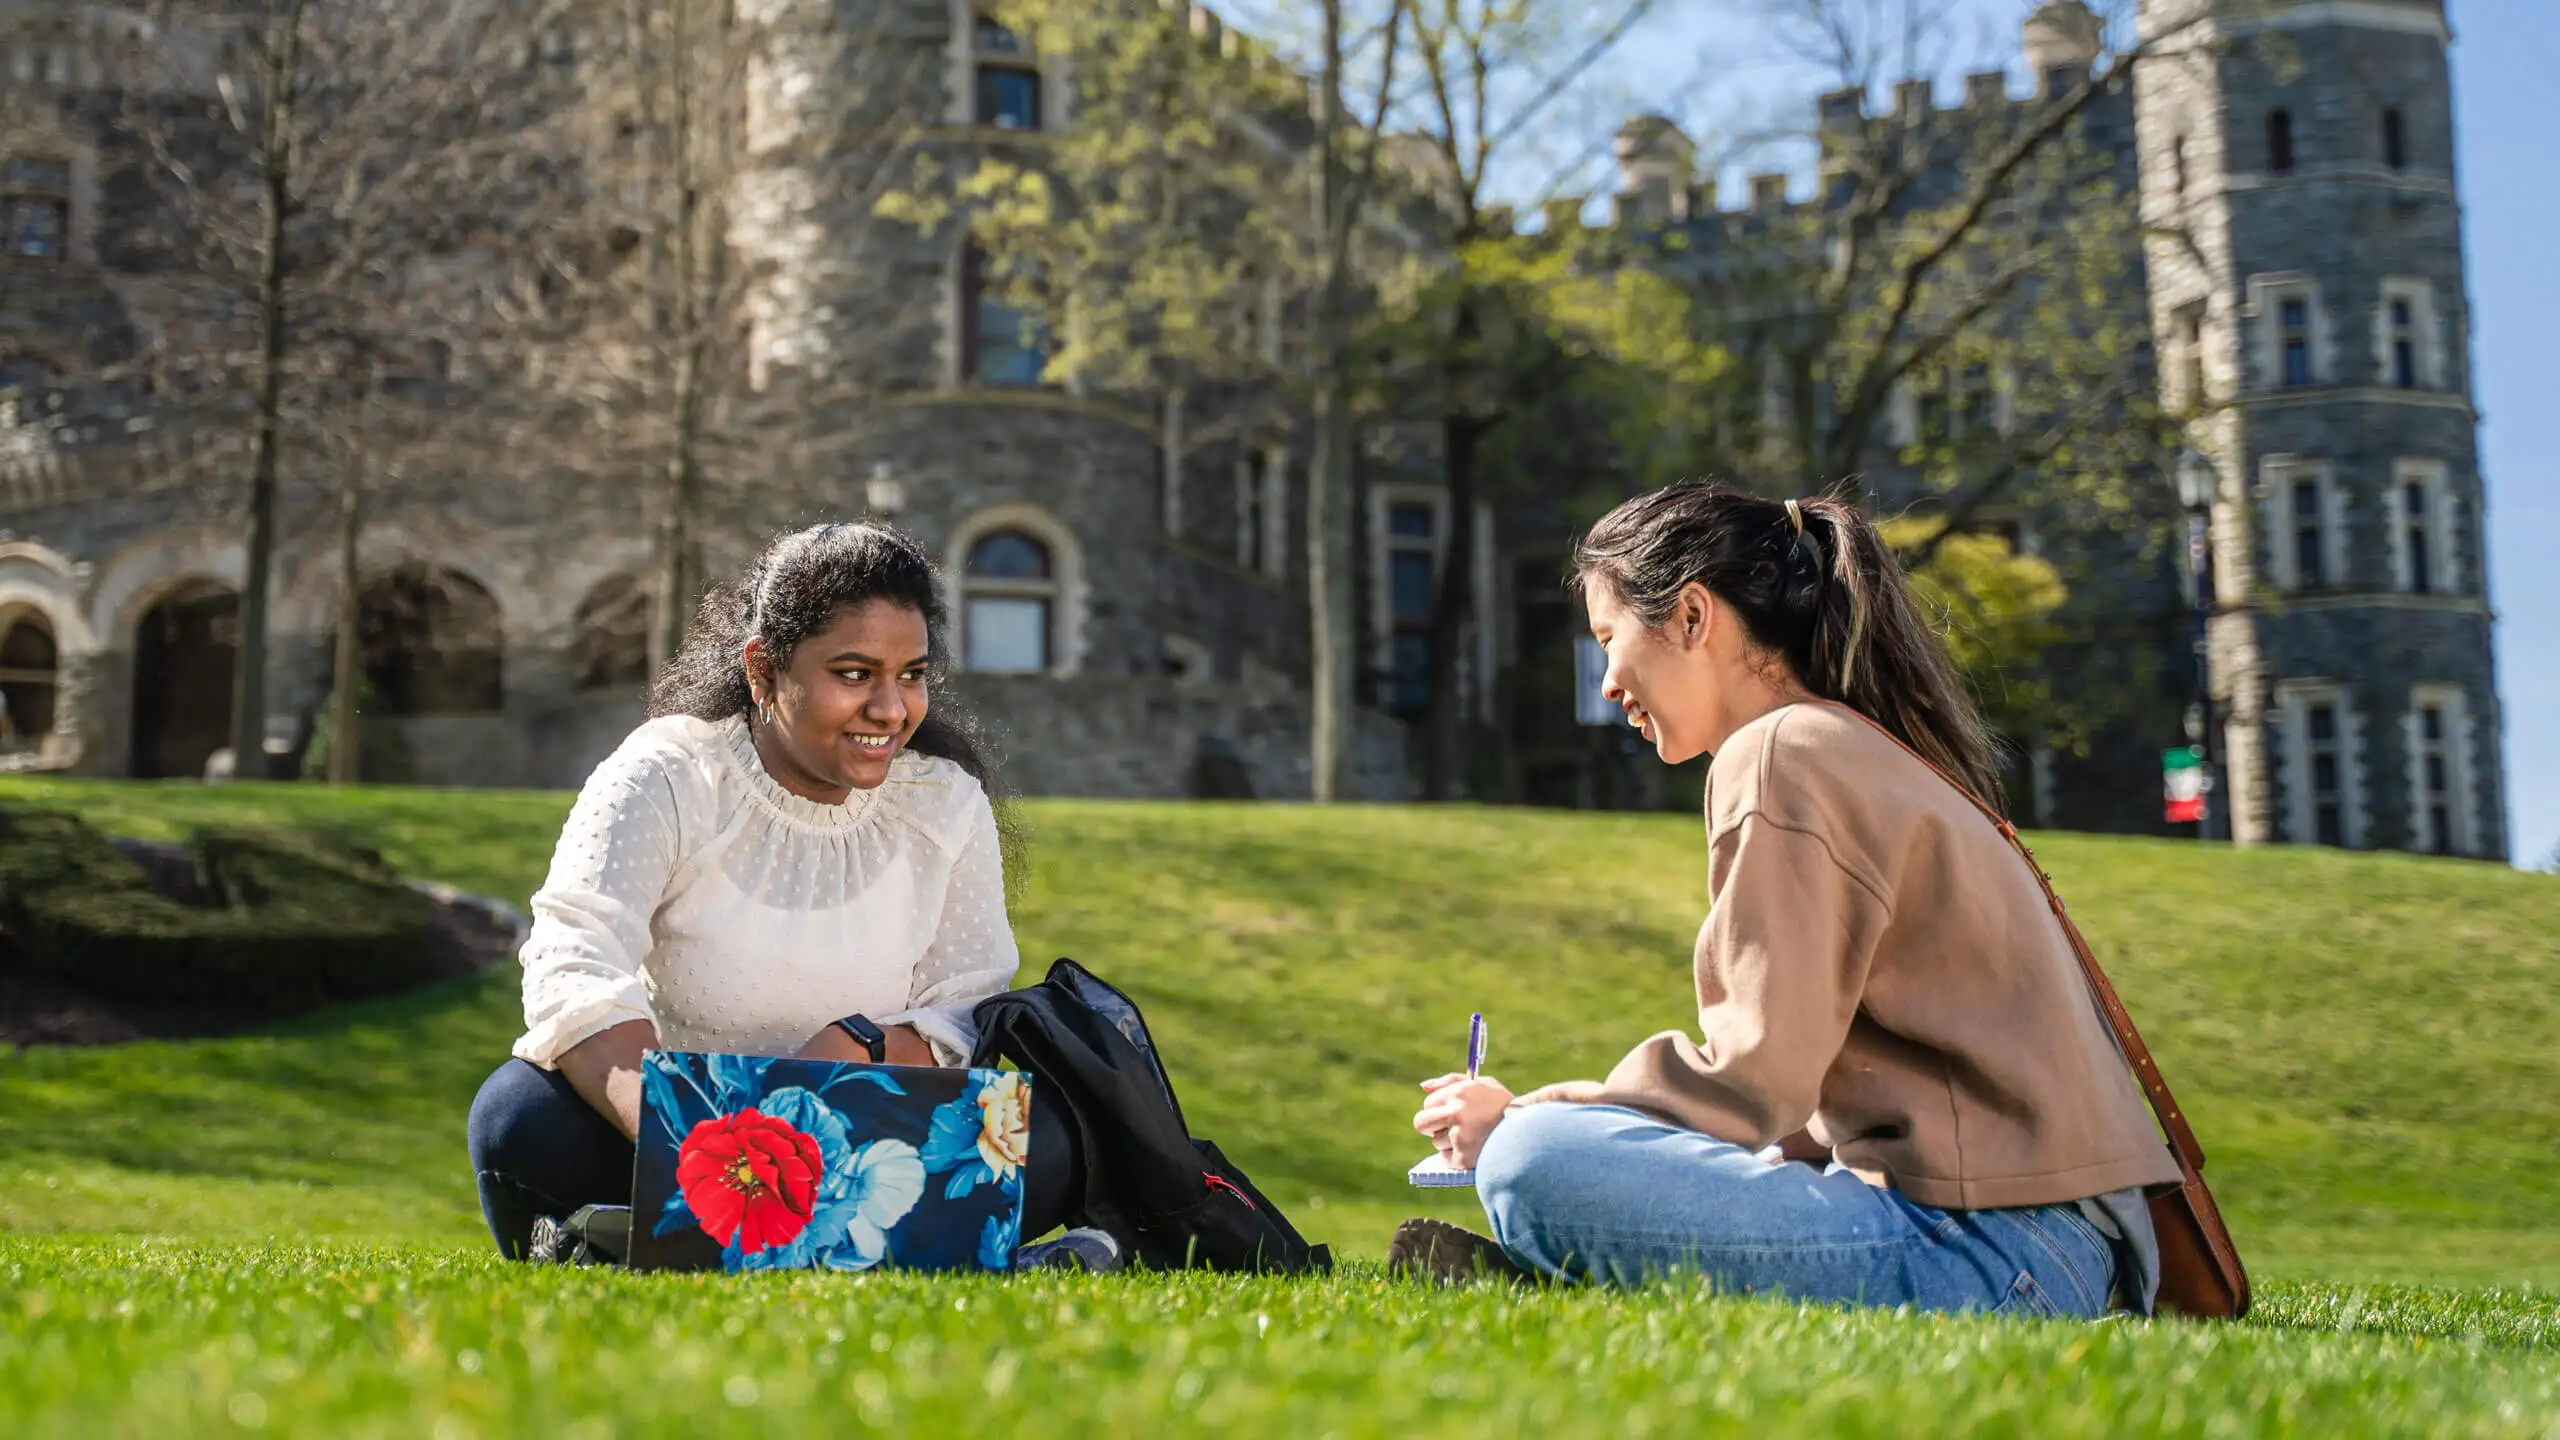 Two Arcadia University students smiling and sitting on the lawn in front of Grey Towers. The student on the left is using a laptop and the student on the right is writing notes in a notebook.